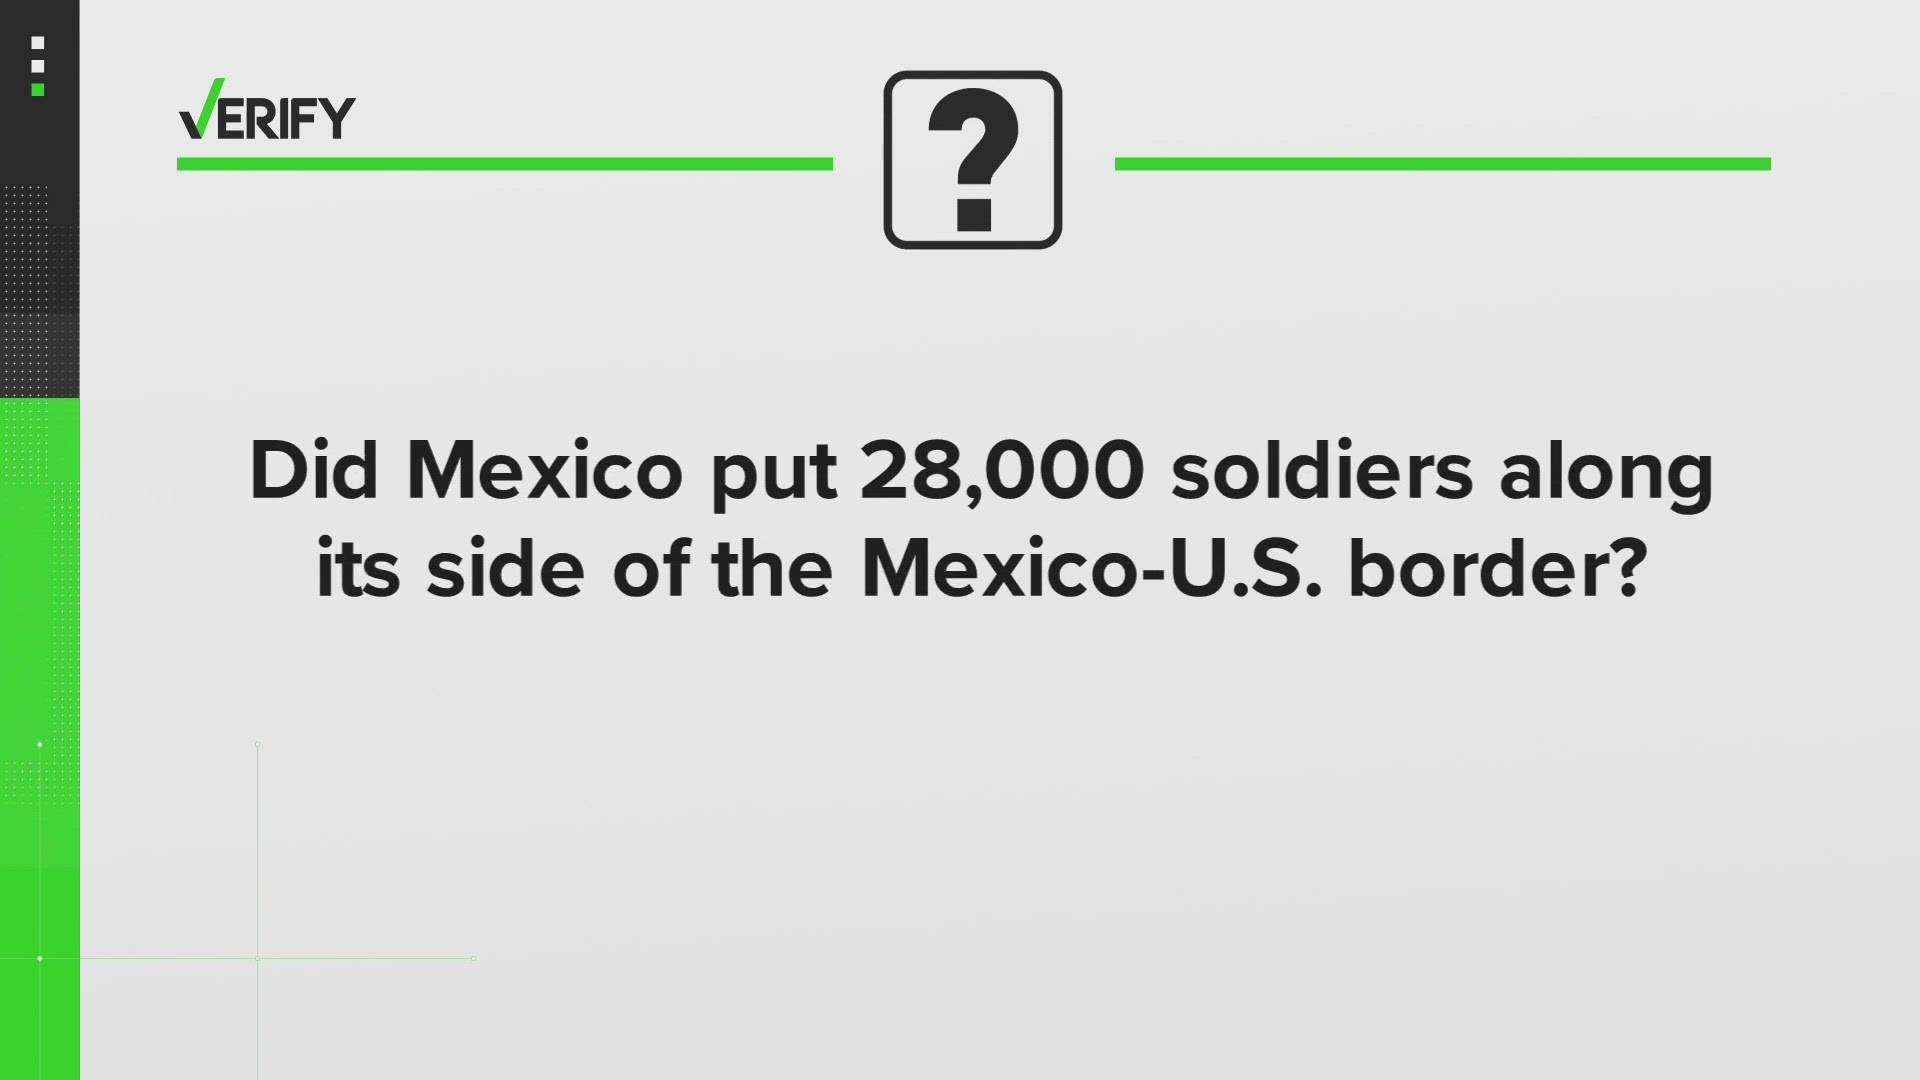 Did Mexico put 28,000 soldiers additional along its side of the border with the U.S.?